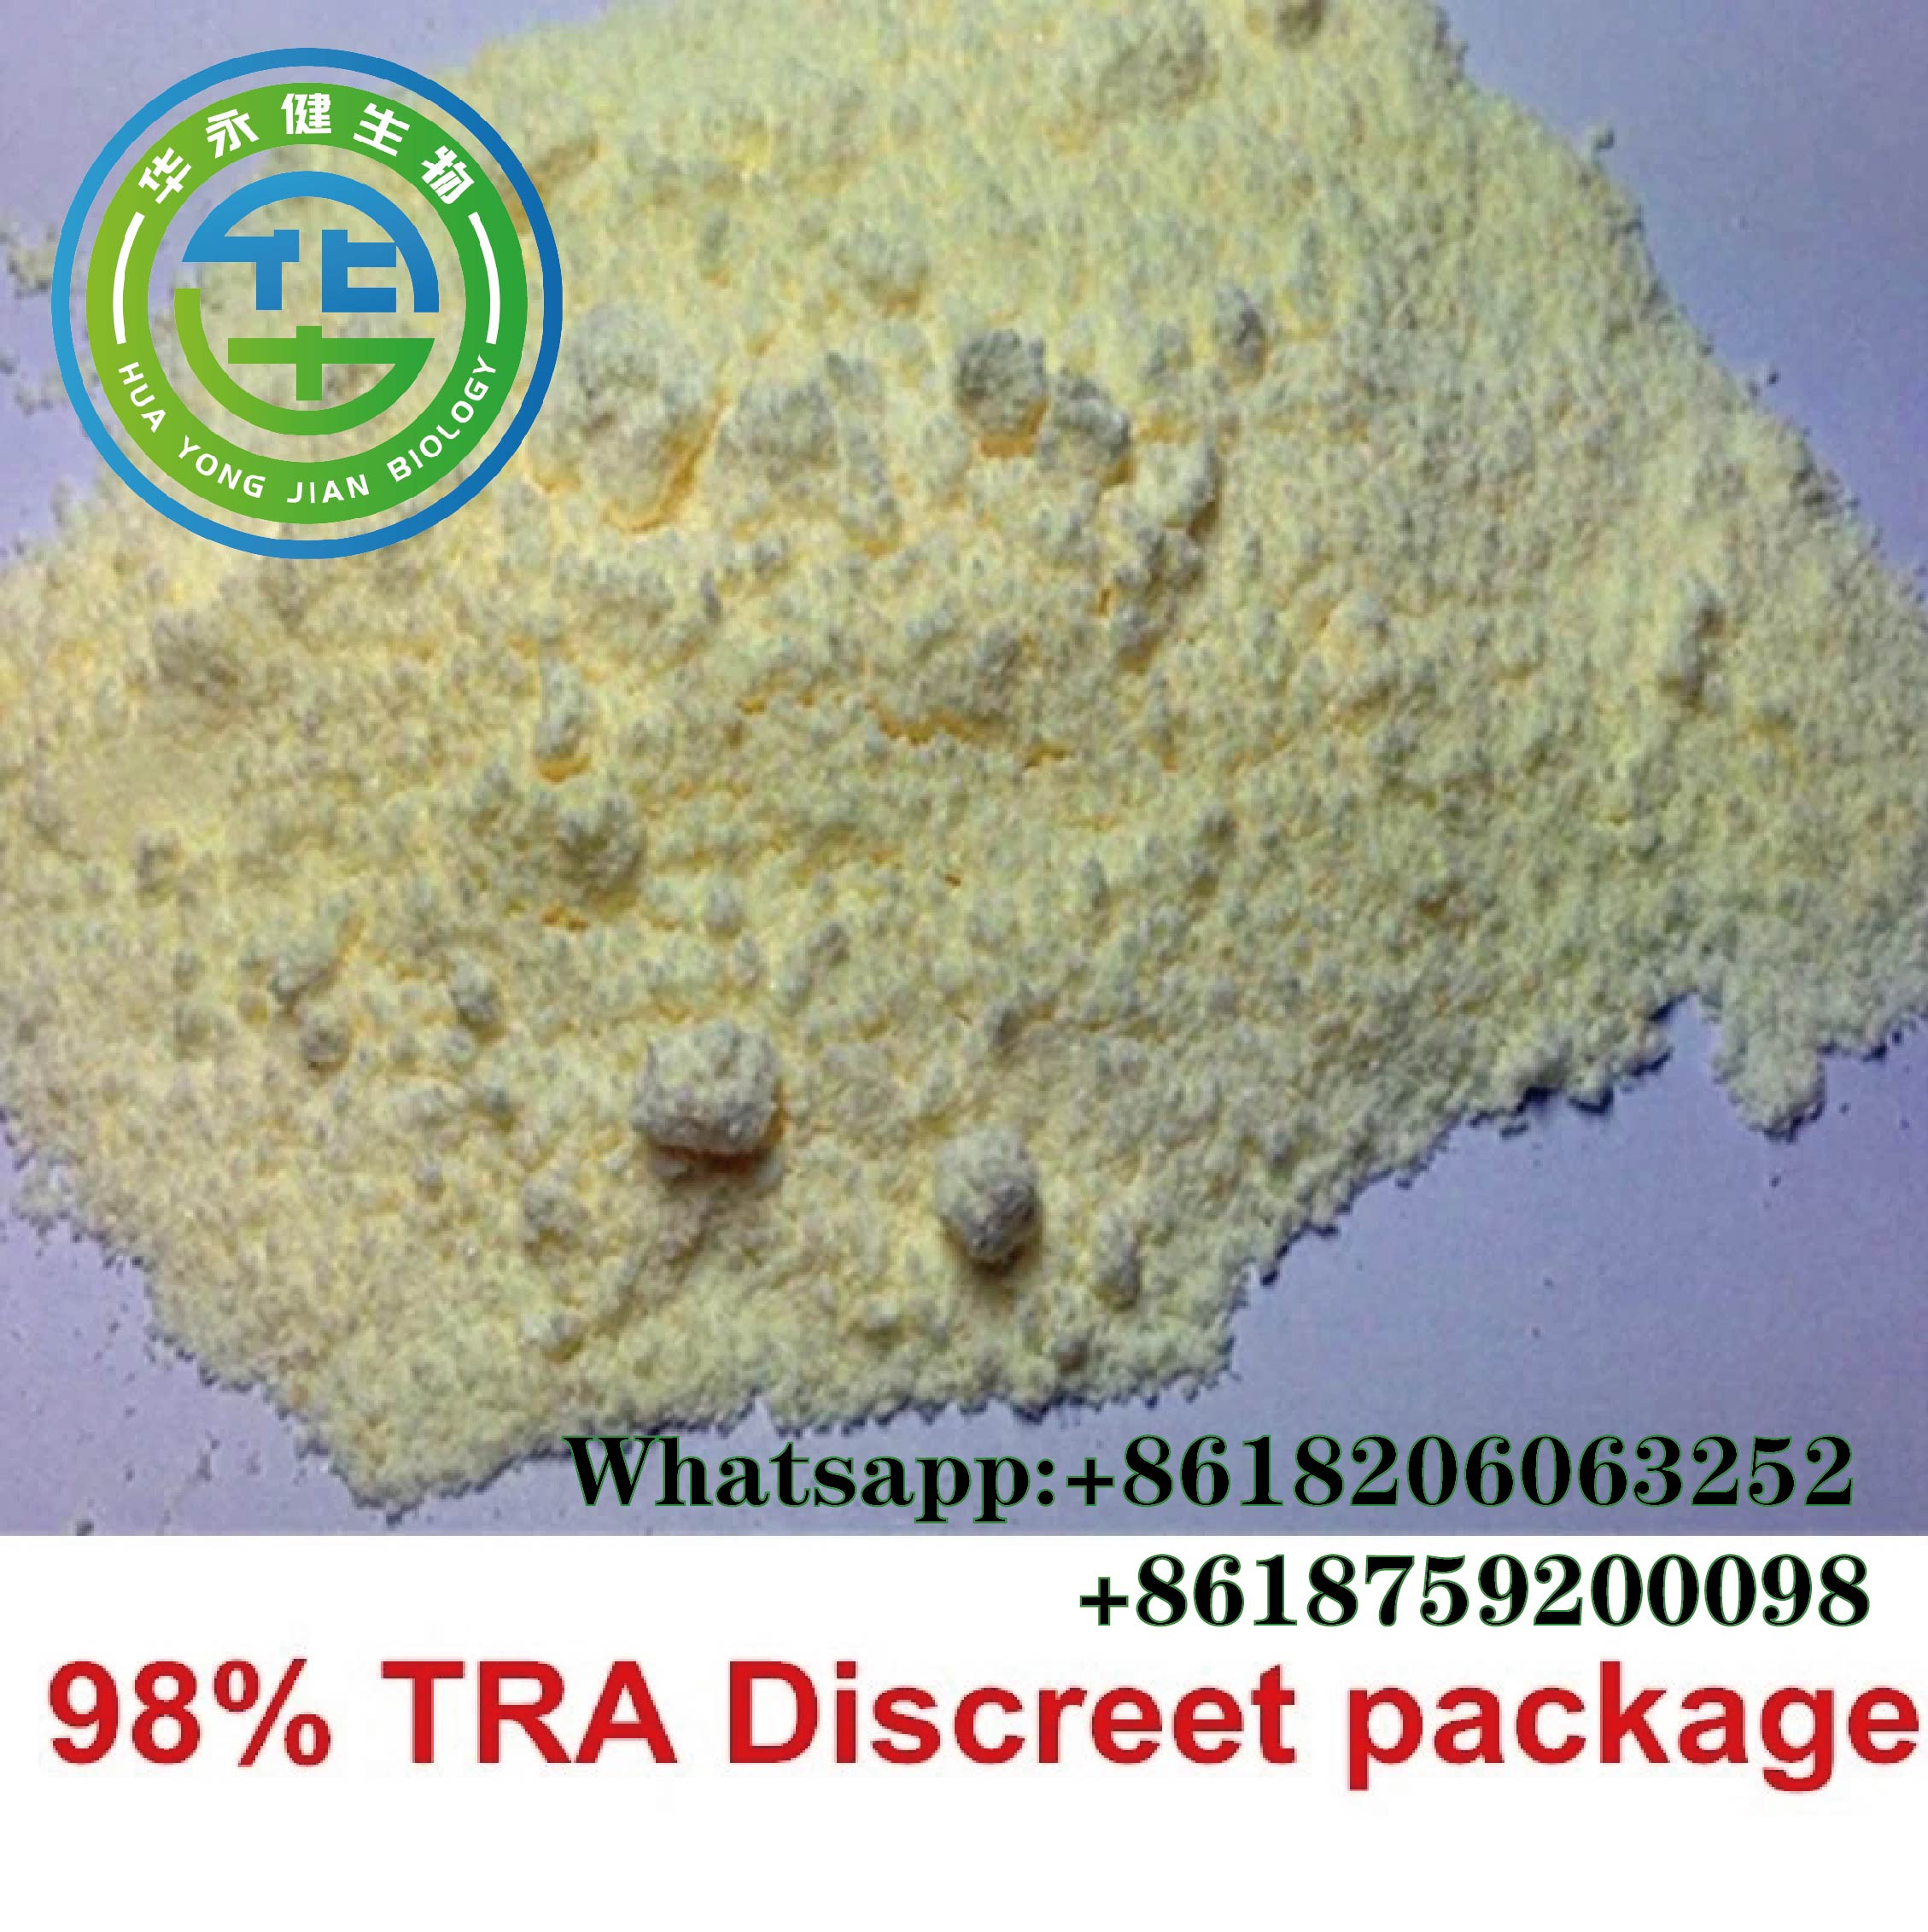 Trenbolone Acetate Androgenic Anabolic Steroids Bodybuilding Cutting Cycle Fat Loss Tren A CasNO.10161-34-9  